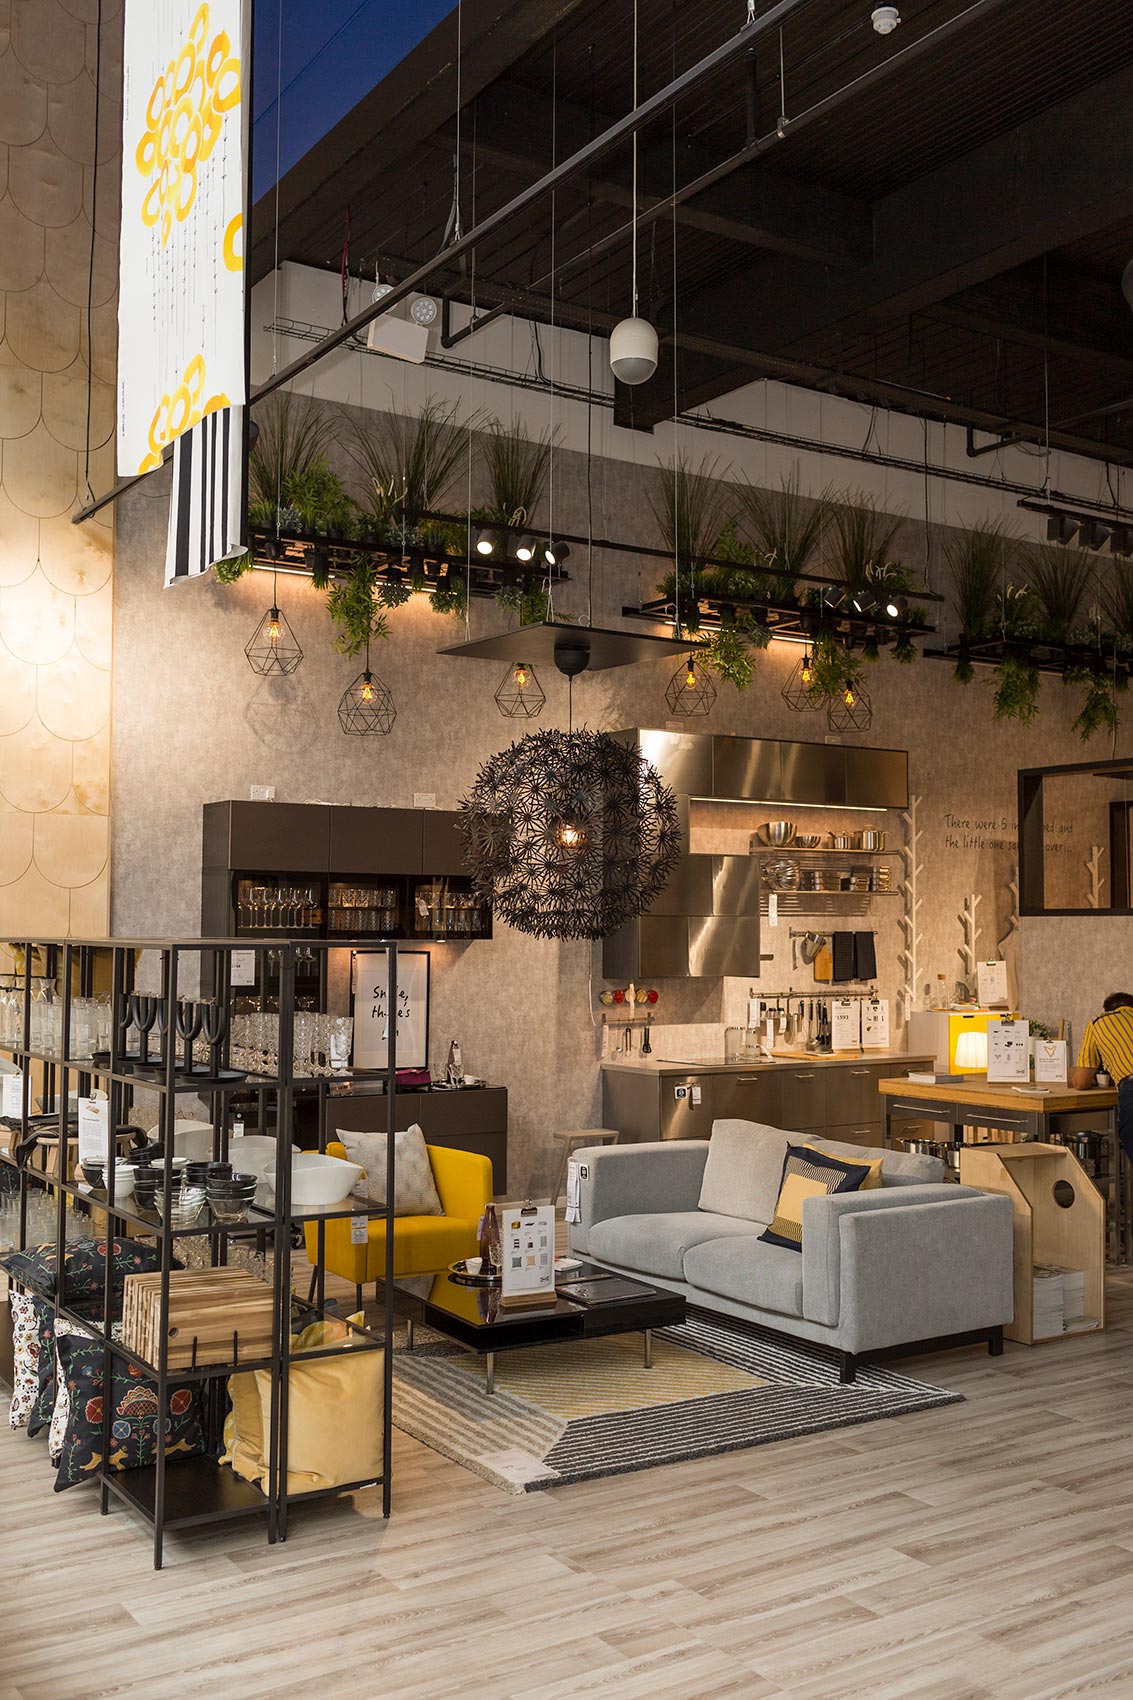 The future of Ikea: Small stores in big cities